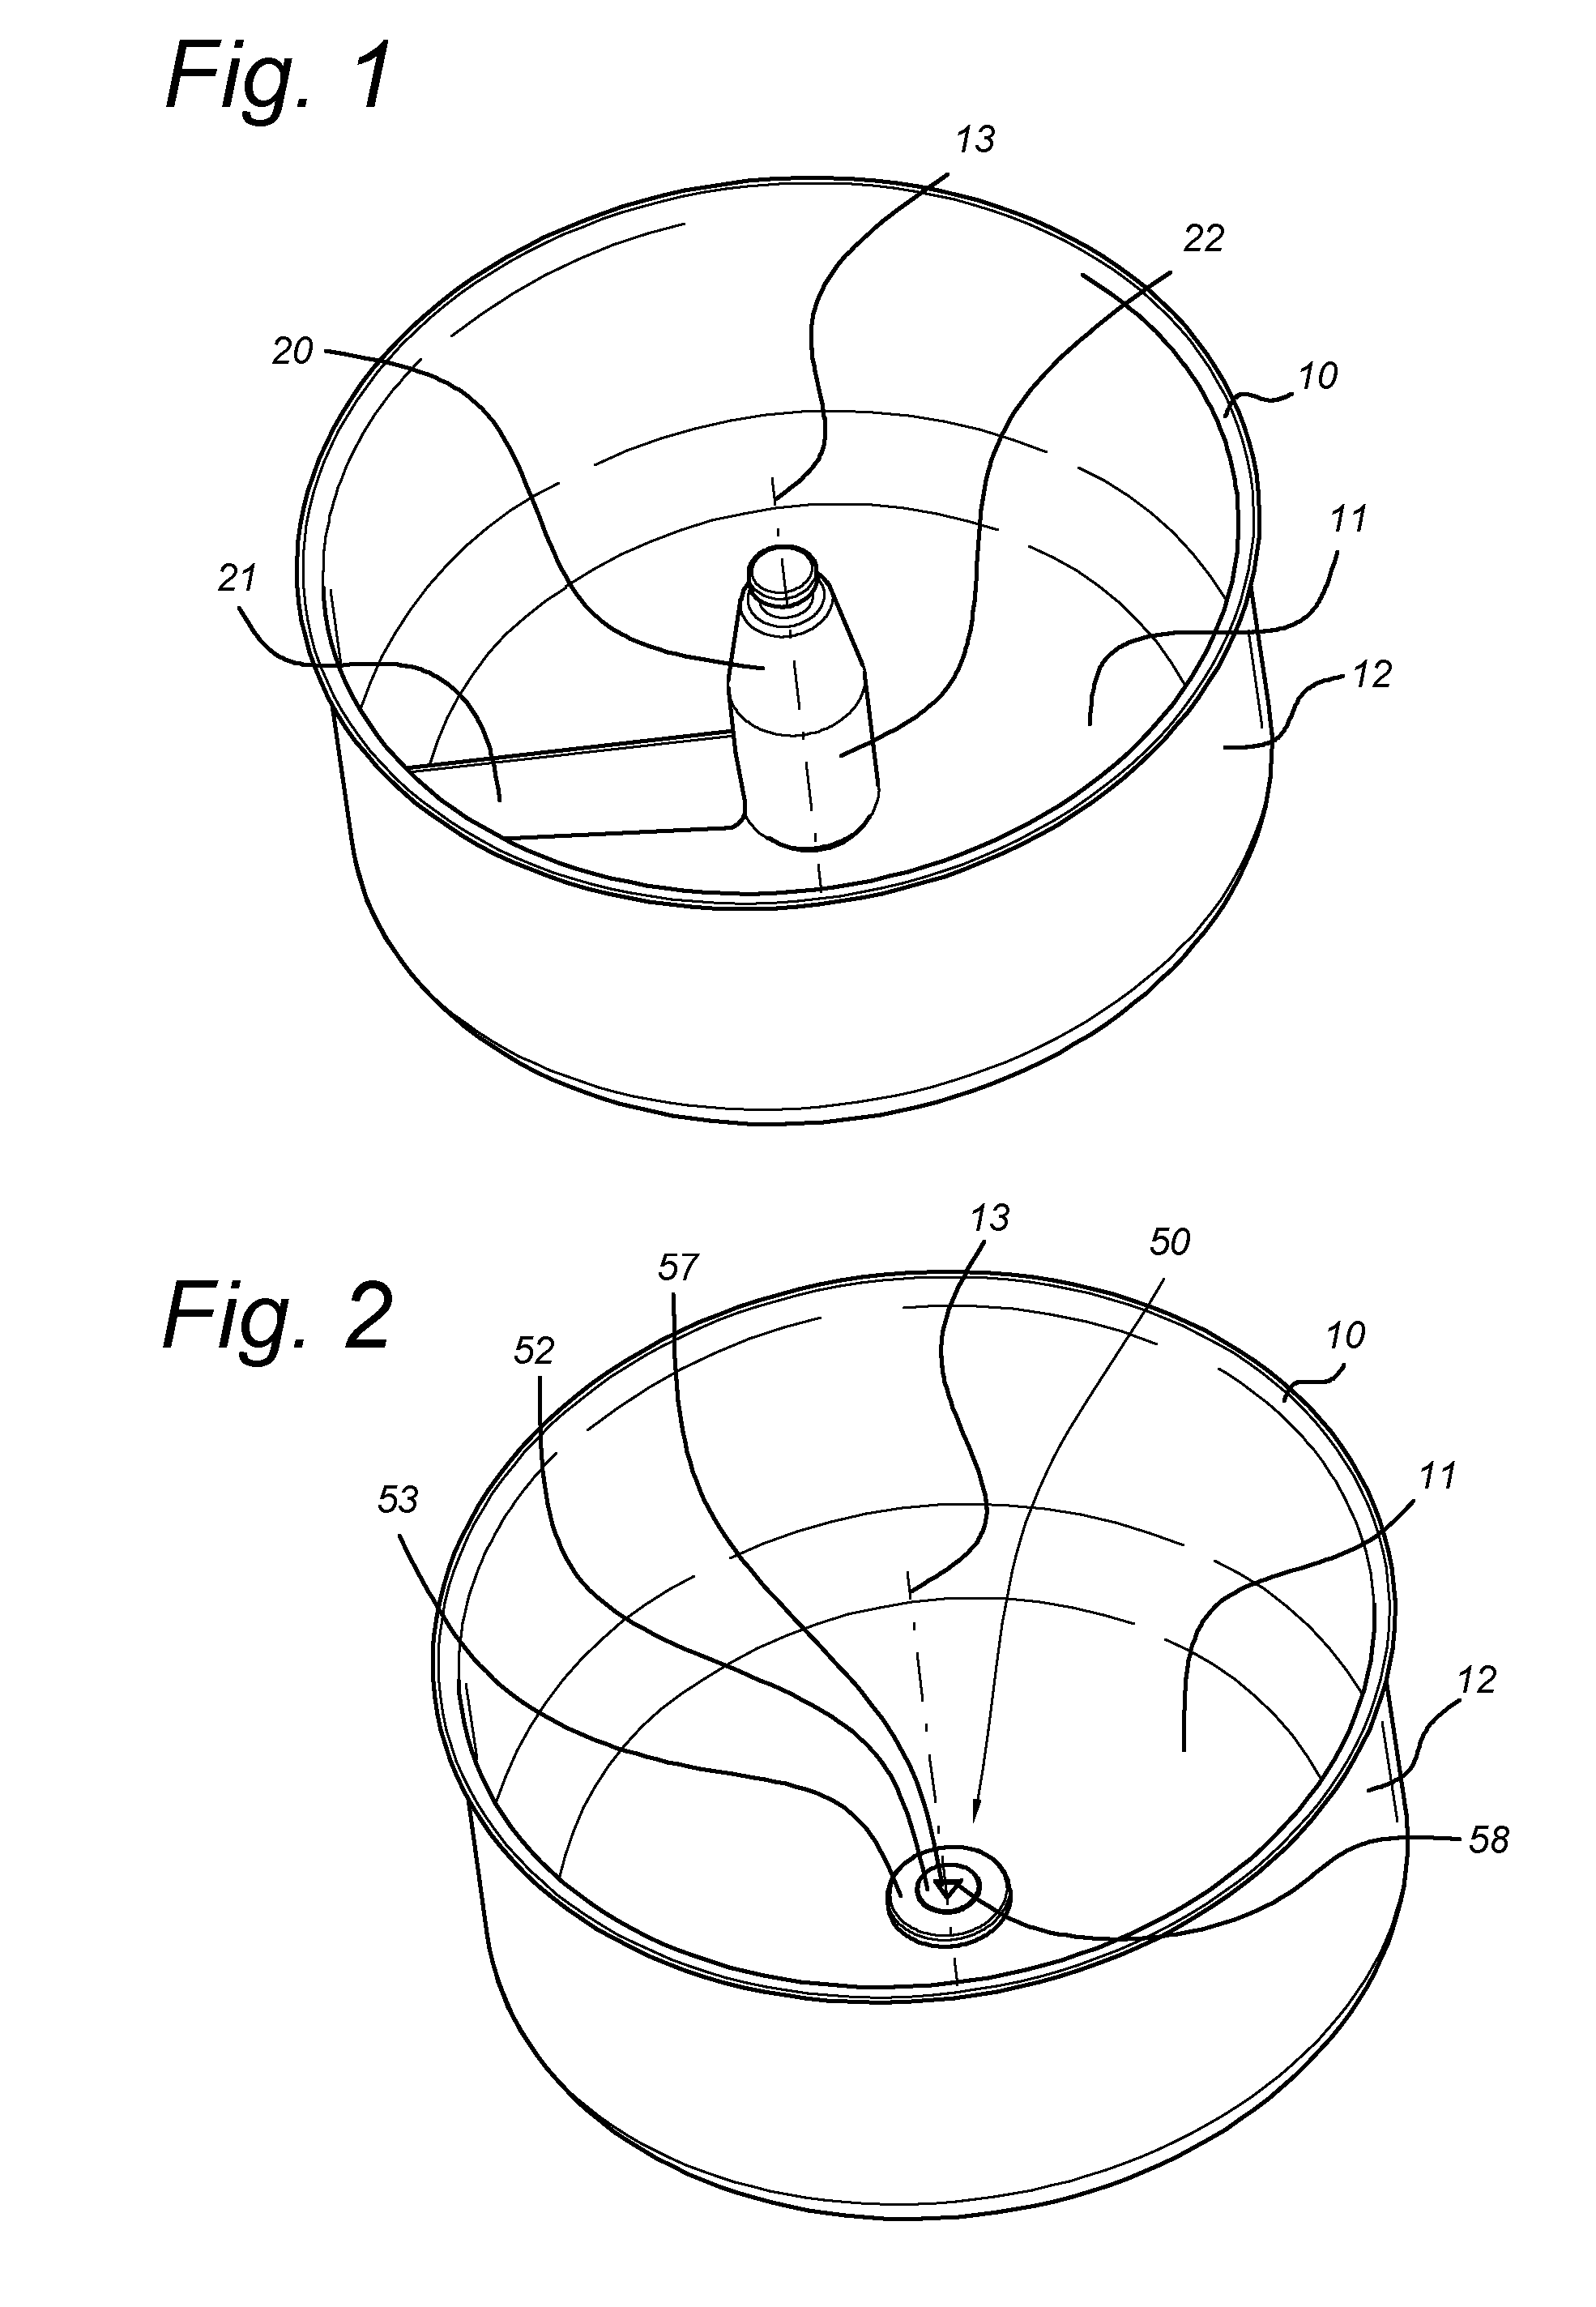 Cooking stove having a drive assembly for driving a food processing assembly in a pan